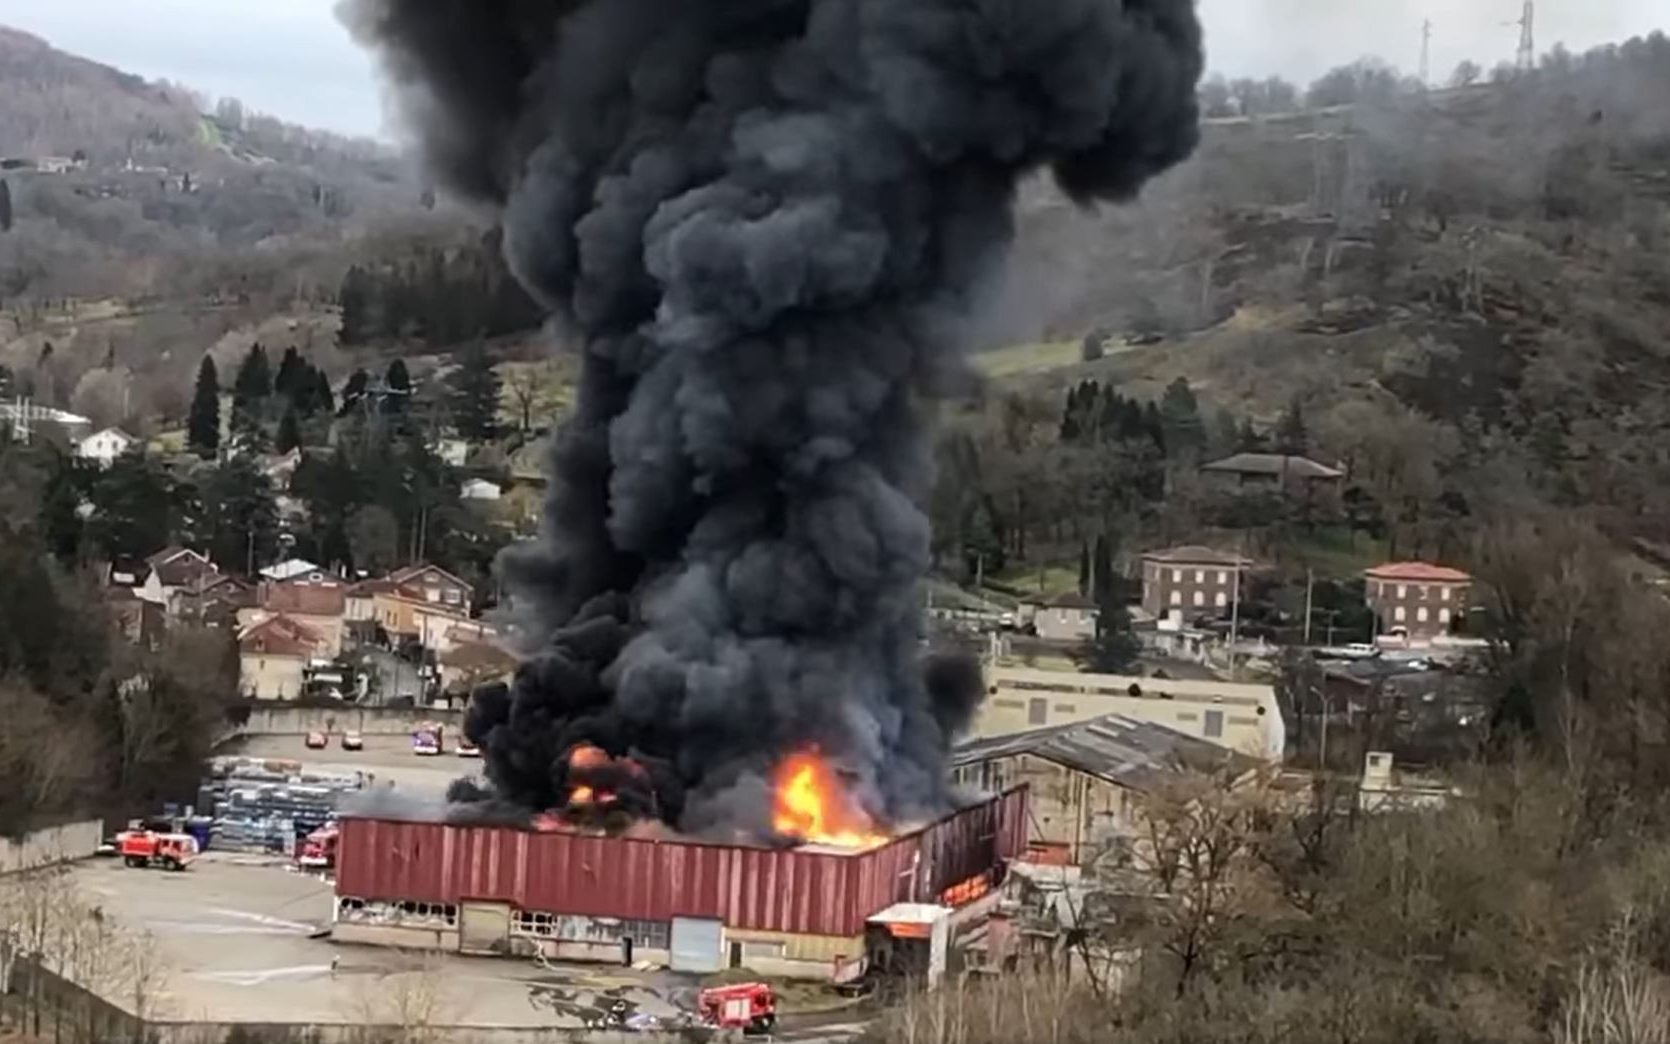 lithium battery warehouse goes up in flames